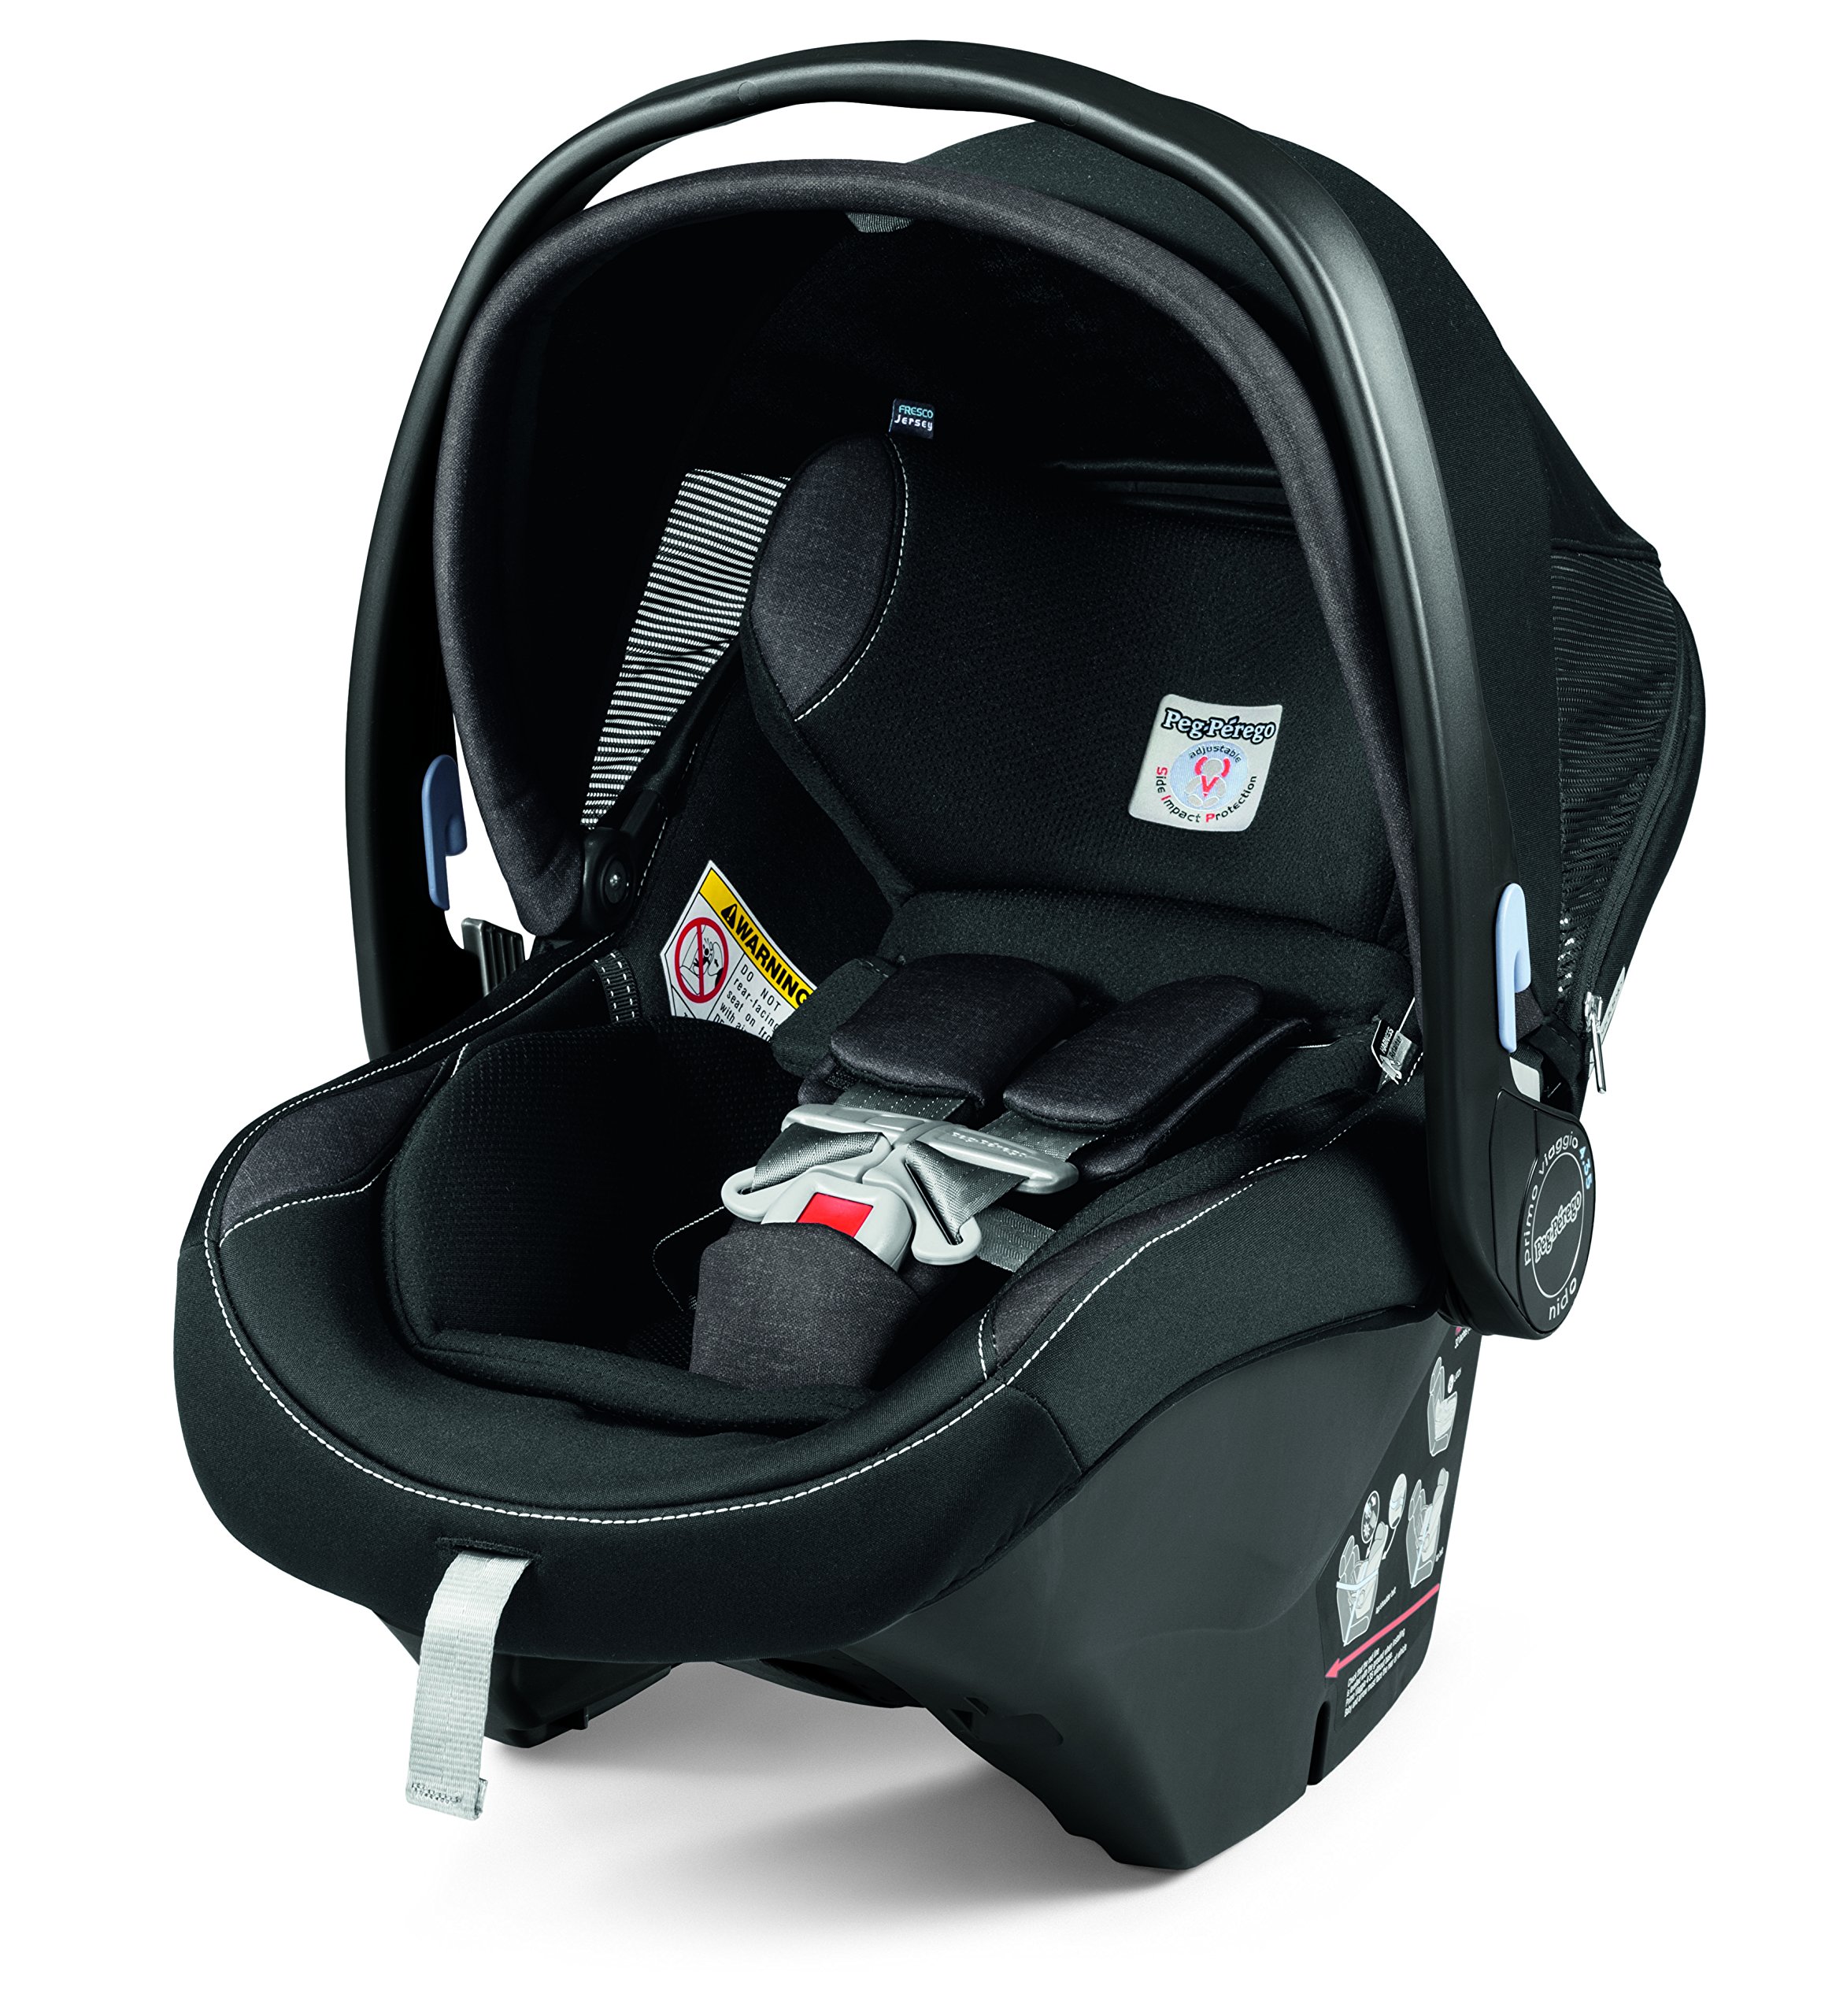 Peg Perego Ypsi Travel System - Includes Ypsi Lightweight Reversible Stroller and Primo Viaggio 4-35 Nido Infant Car Seat - Made in Italy - Onyx (Black)